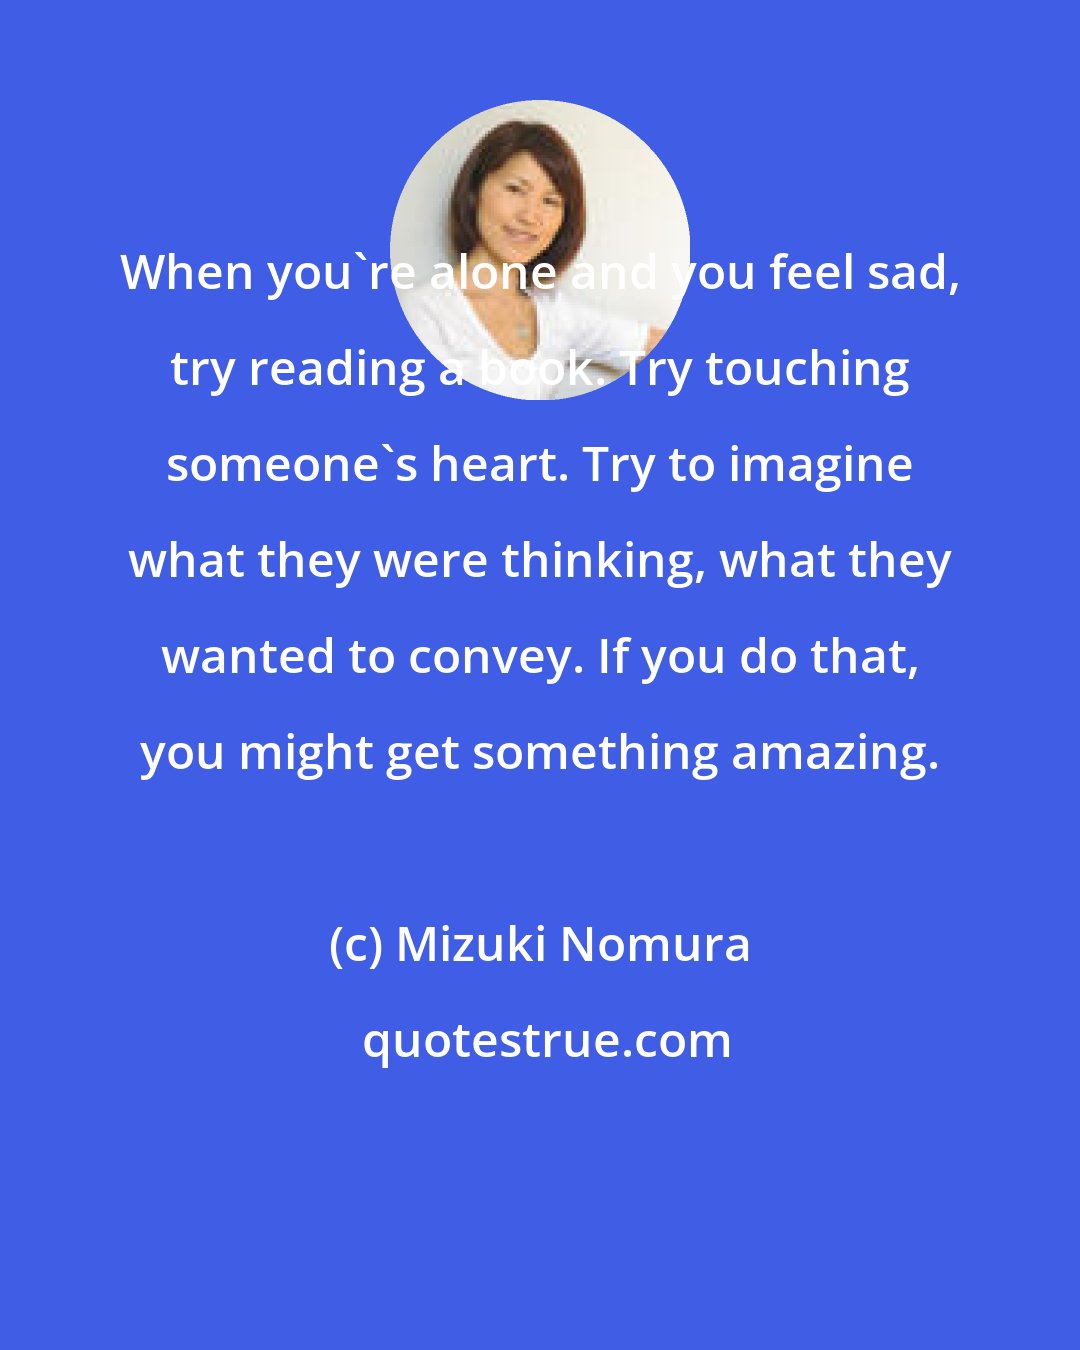 Mizuki Nomura: When you're alone and you feel sad, try reading a book. Try touching someone's heart. Try to imagine what they were thinking, what they wanted to convey. If you do that, you might get something amazing.